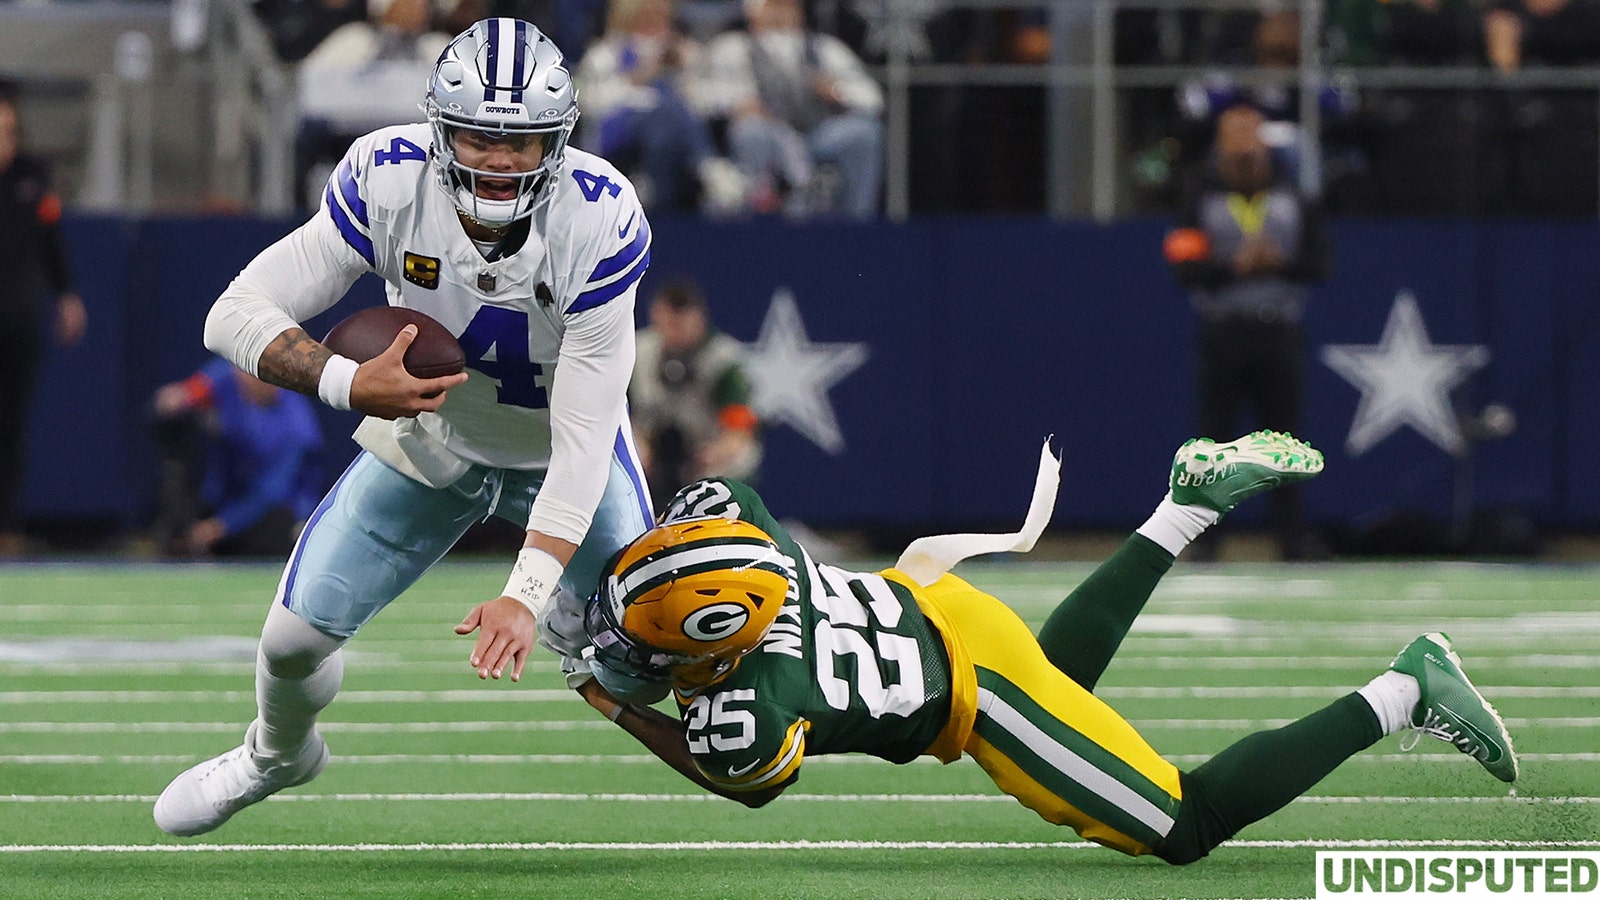 Cowboys fall to Packers in the first round of the NFL Playoffs